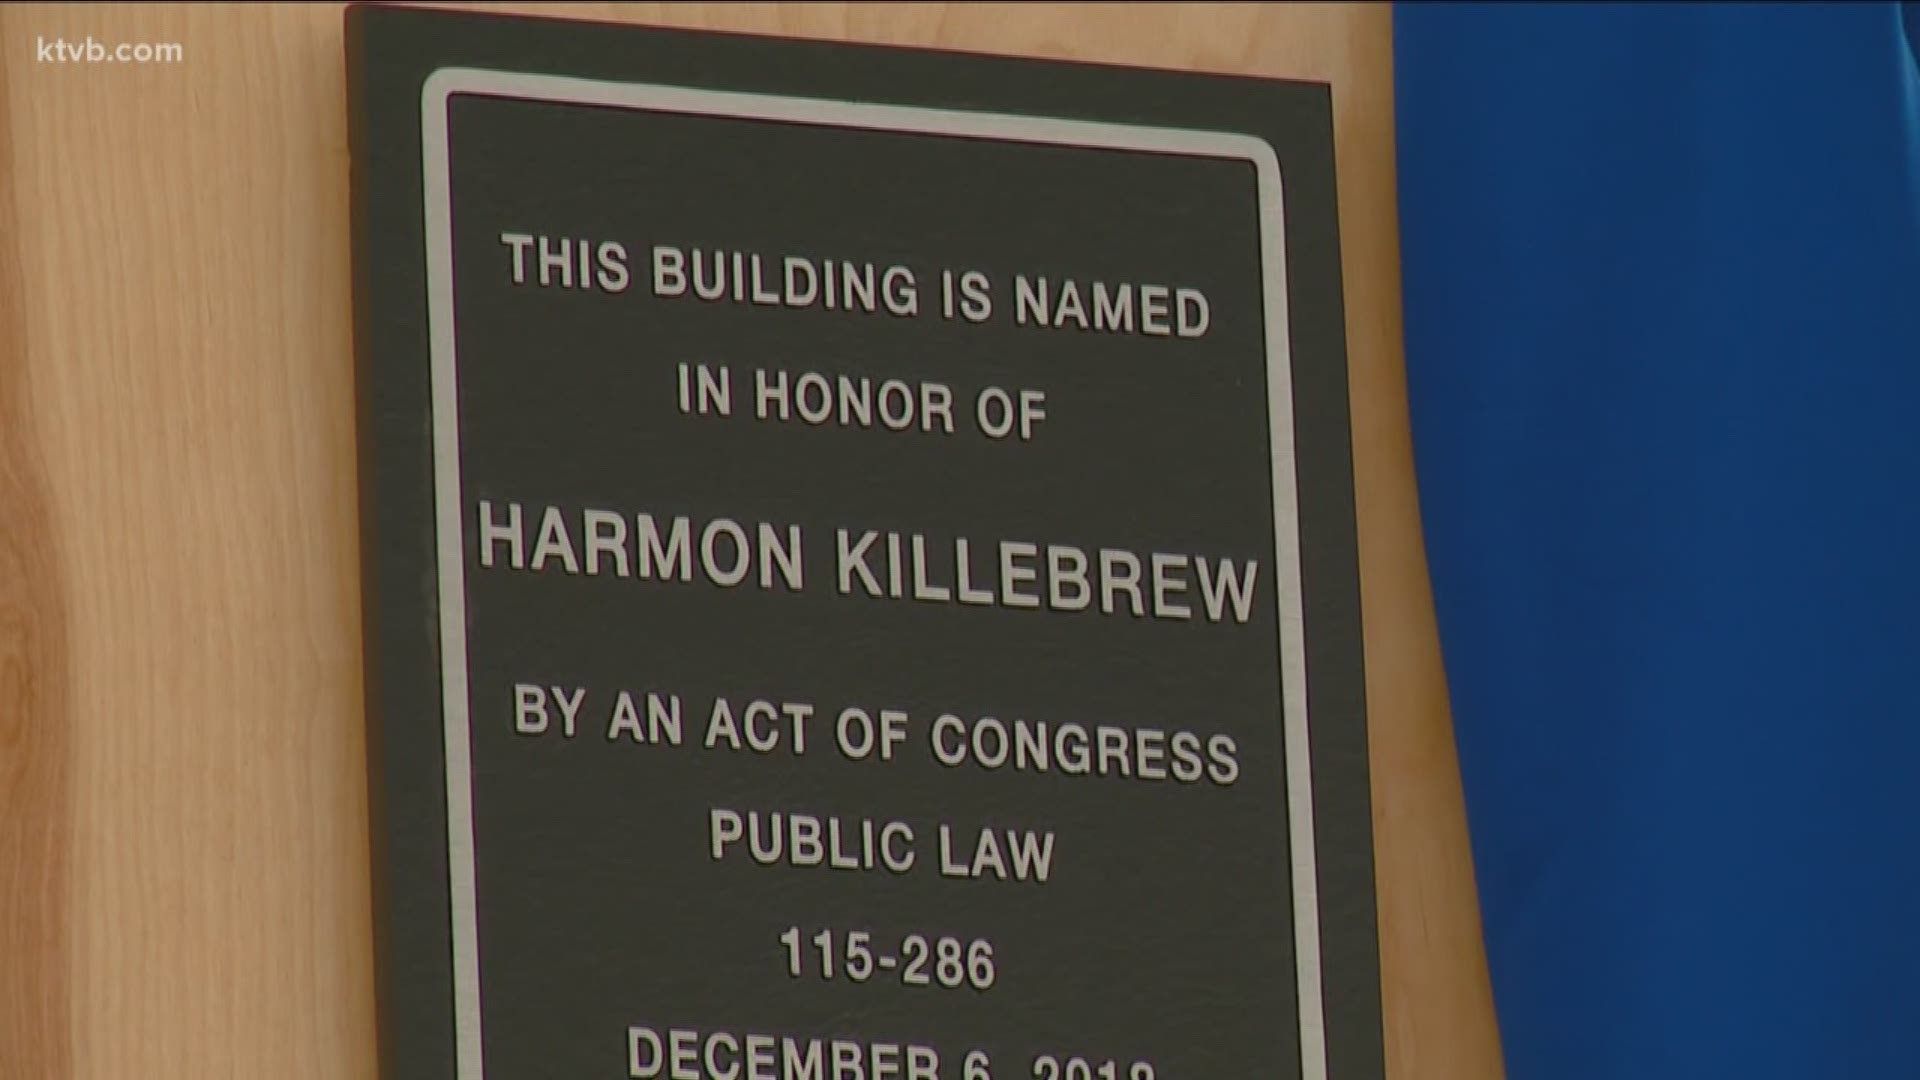 With 573 career home runs, Harmon Killebrew not only made his presence known at the plate but also in his hometown.